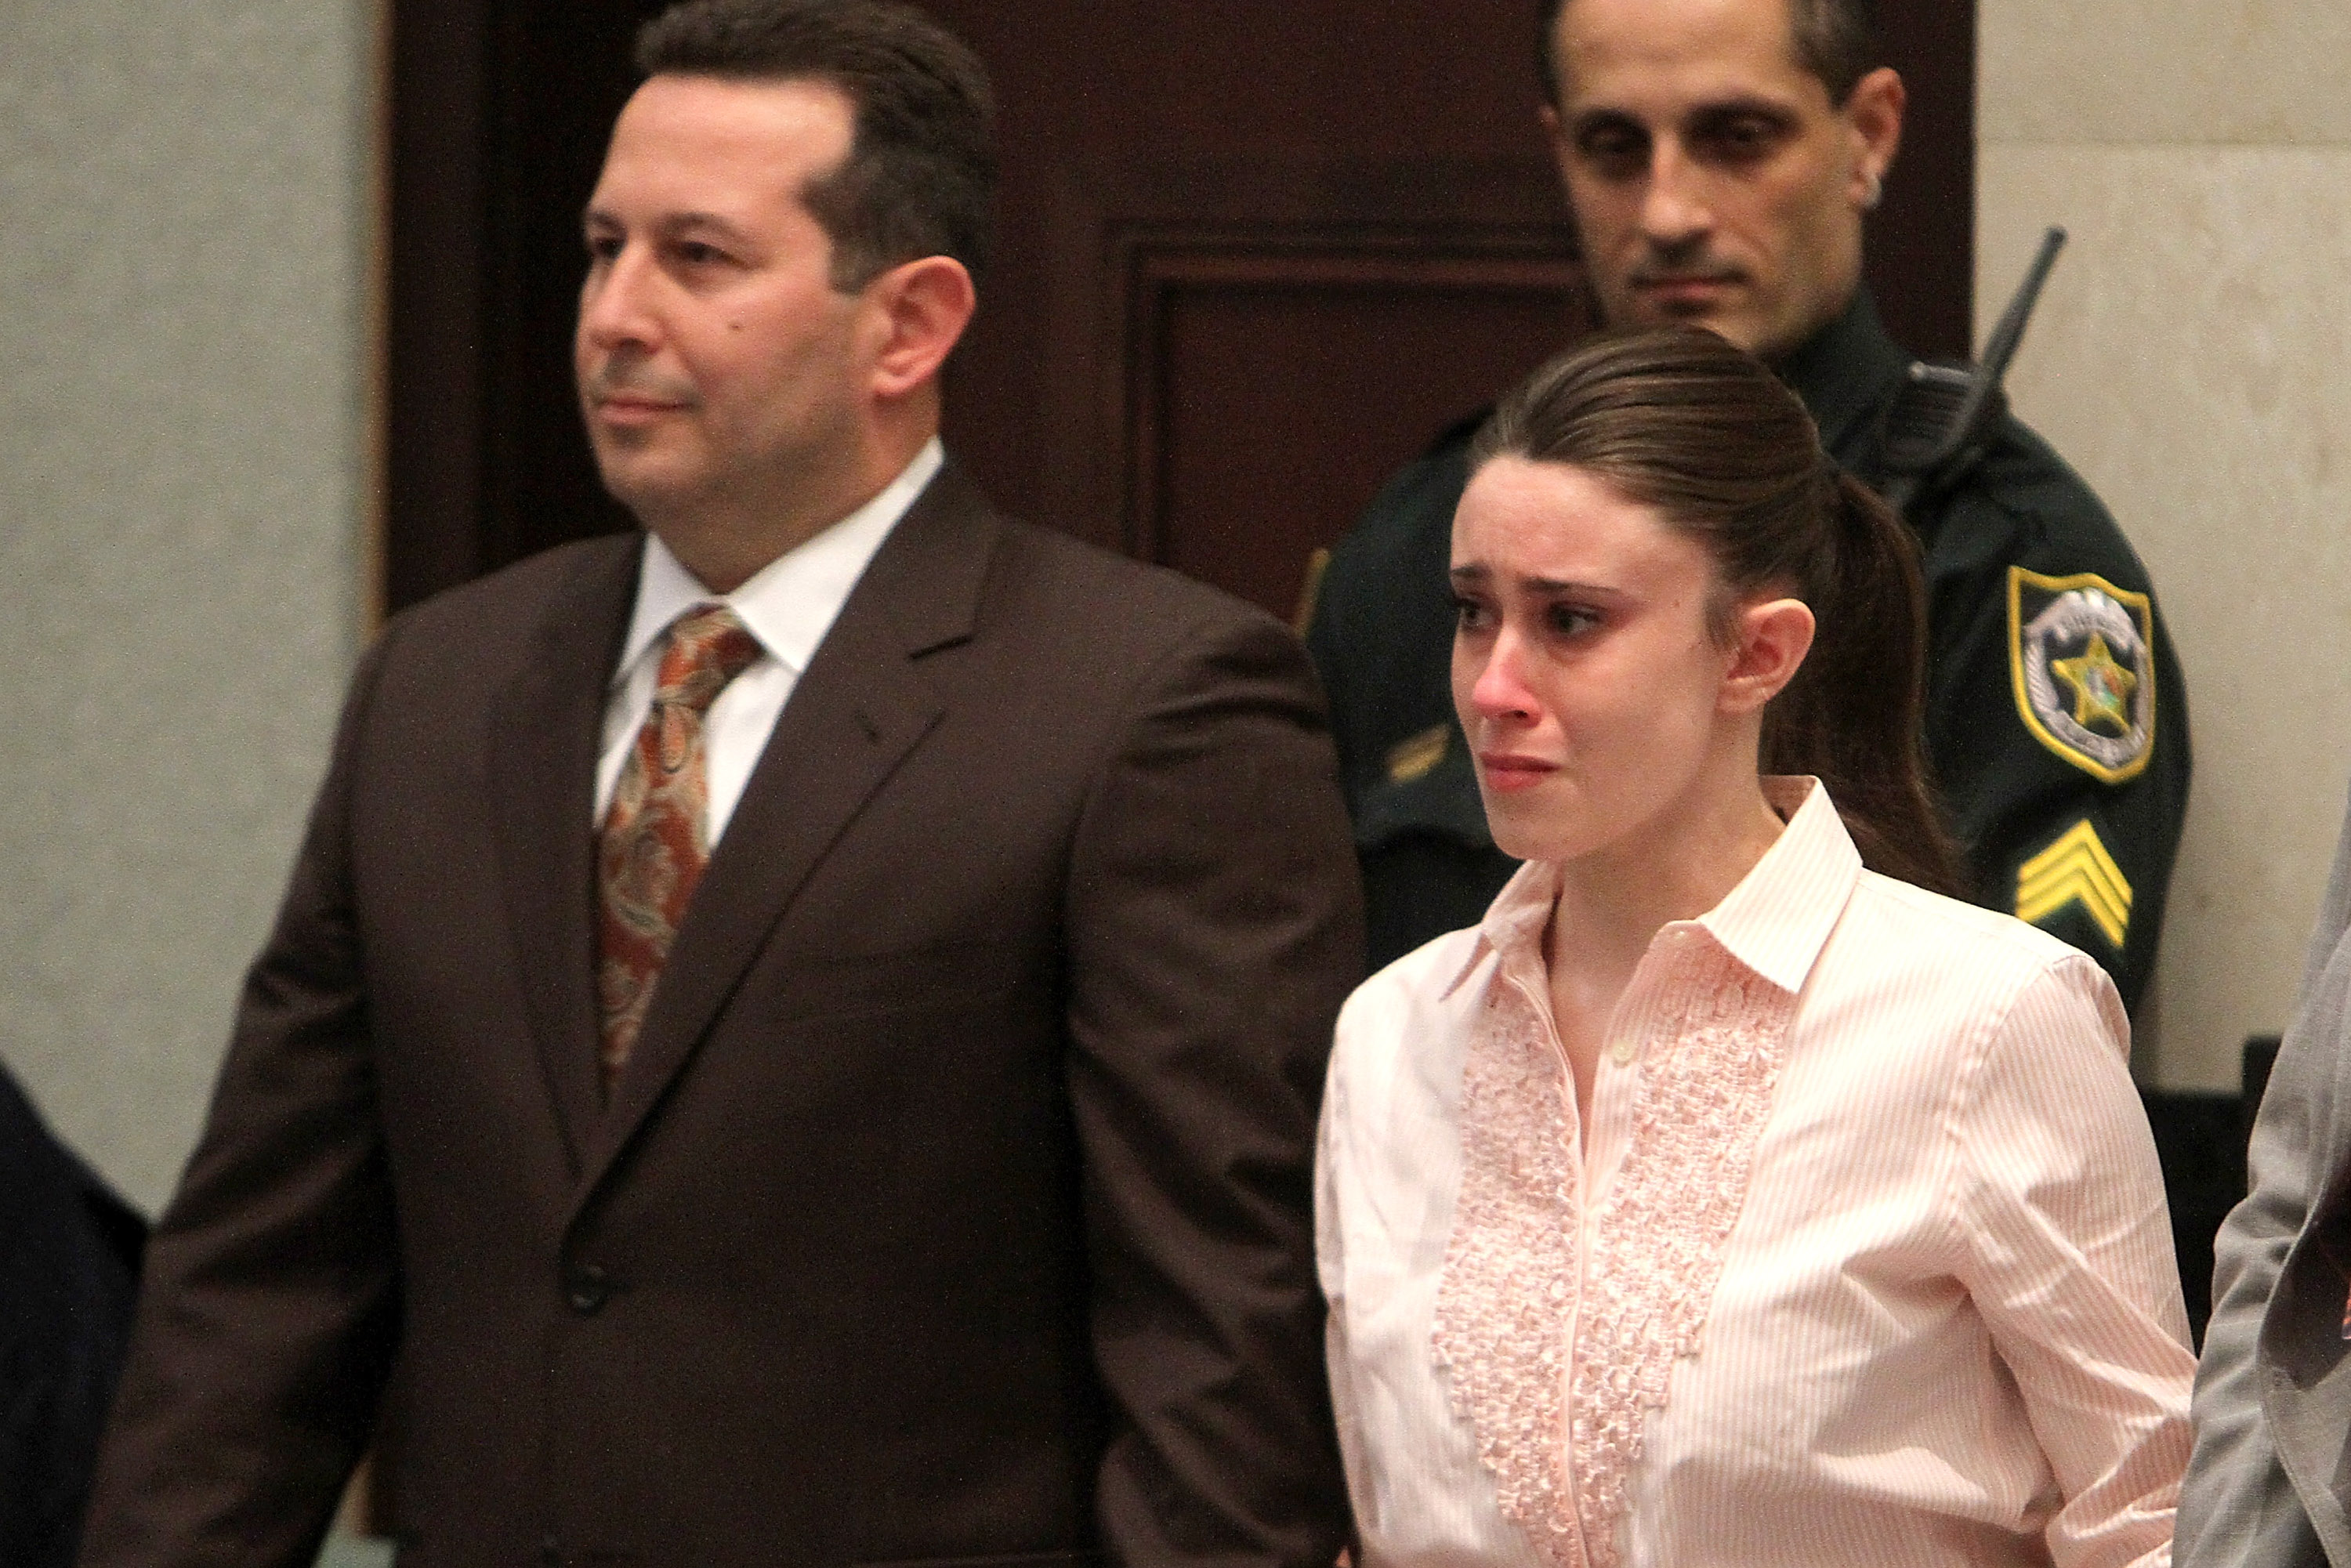 Casey Anthony (R) reacts to being found not guilty on murder charges at the Orange County Courthouse on July 5, 2011 in Orlando, Florida. At left is her attorney Jose Baez. Casey Anthony had been accused of murdering her two-year-old daughter Caylee in 2008. (Photo by Red Huber-Pool/Getty Images)